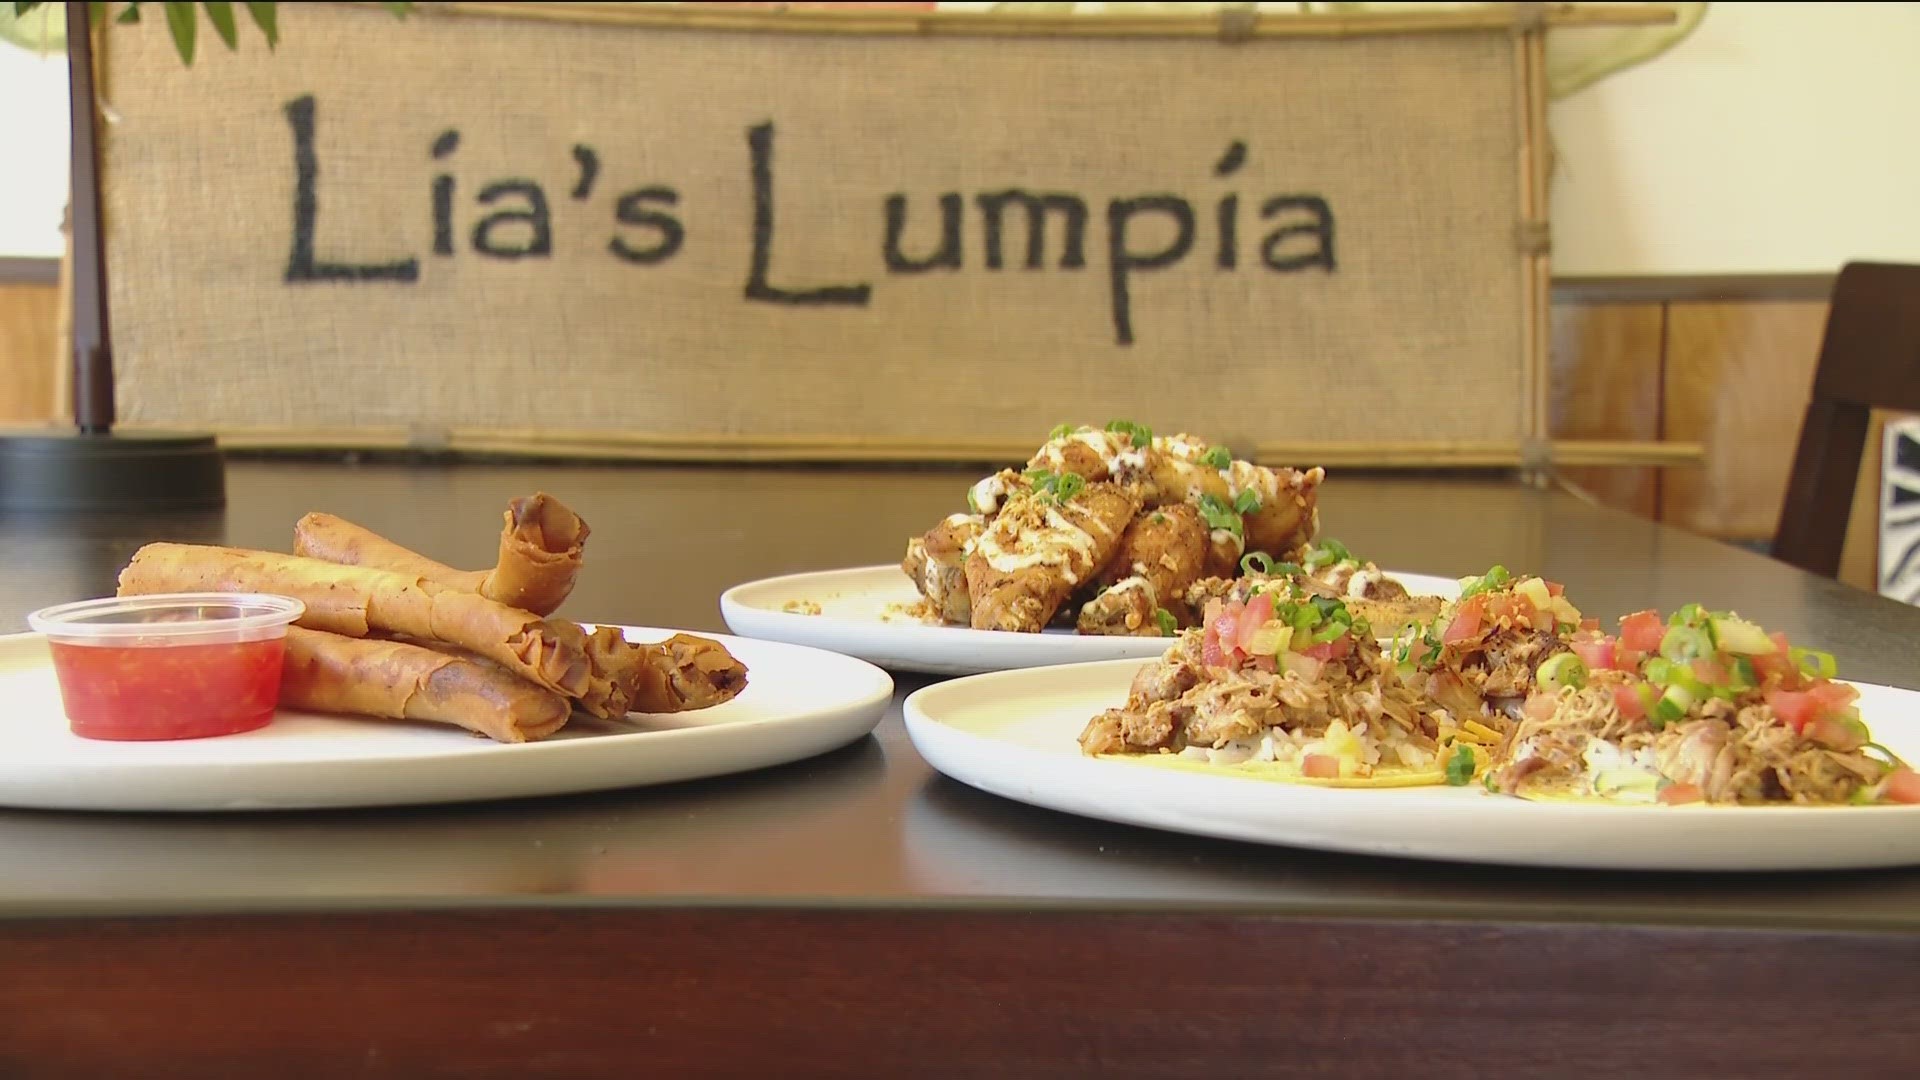 Lia's Lumpia not only has a brick-and-mortar location in Barrio Logan, but they also have a food truck serving unique lumpia such as mac and cheese and pork adobo.